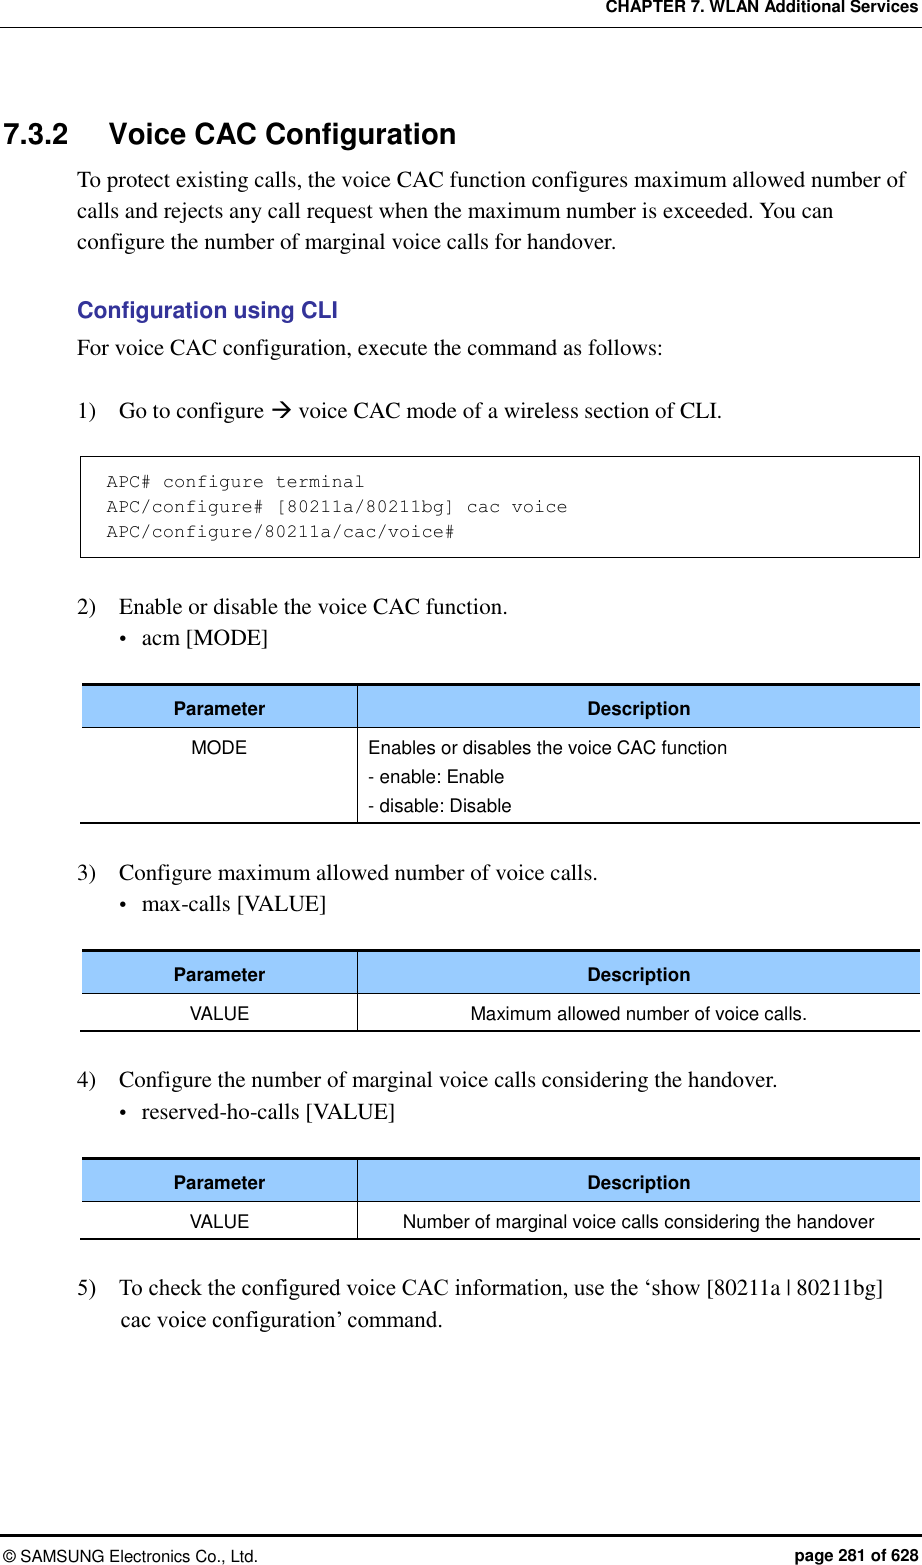 CHAPTER 7. WLAN Additional Services ©  SAMSUNG Electronics Co., Ltd.  page 281 of 628 7.3.2  Voice CAC Configuration To protect existing calls, the voice CAC function configures maximum allowed number of calls and rejects any call request when the maximum number is exceeded. You can configure the number of marginal voice calls for handover.  Configuration using CLI For voice CAC configuration, execute the command as follows:  1)    Go to configure  voice CAC mode of a wireless section of CLI.  APC# configure terminal APC/configure# [80211a/80211bg] cac voice APC/configure/80211a/cac/voice#  2)    Enable or disable the voice CAC function.  acm [MODE]  Parameter Description MODE Enables or disables the voice CAC function - enable: Enable - disable: Disable  3)    Configure maximum allowed number of voice calls.  max-calls [VALUE]  Parameter Description VALUE Maximum allowed number of voice calls.  4)    Configure the number of marginal voice calls considering the handover.  reserved-ho-calls [VALUE]  Parameter Description VALUE Number of marginal voice calls considering the handover  5)    To check the configured voice CAC information, use the ‘show [80211a | 80211bg] cac voice configuration’ command.  